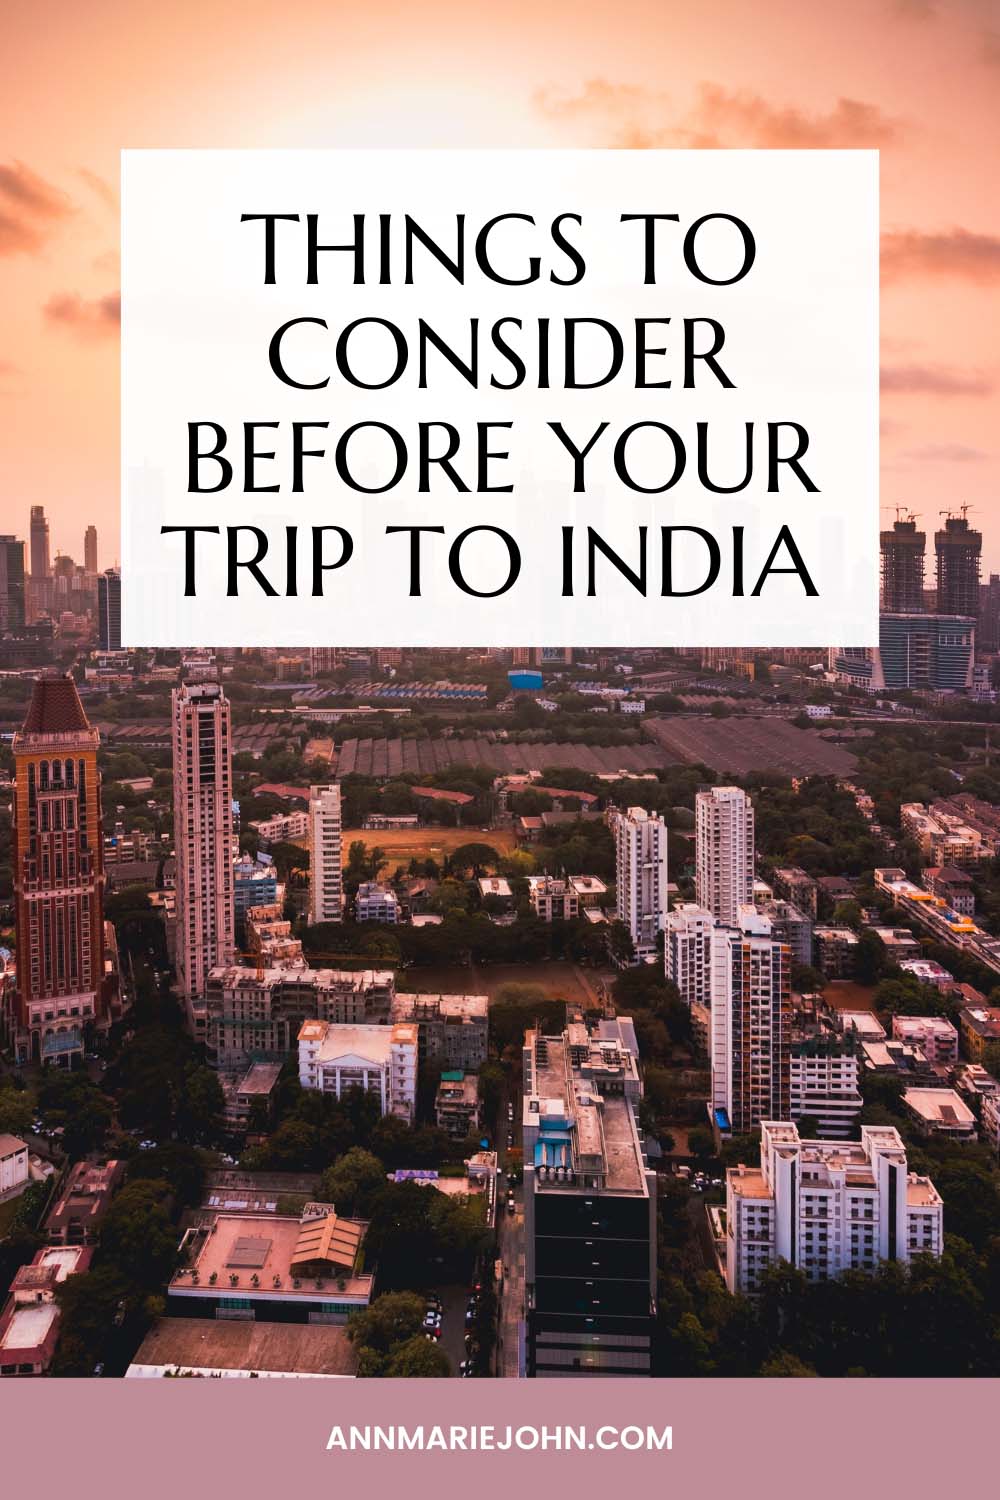 Things to Consider Before Your Trip to India